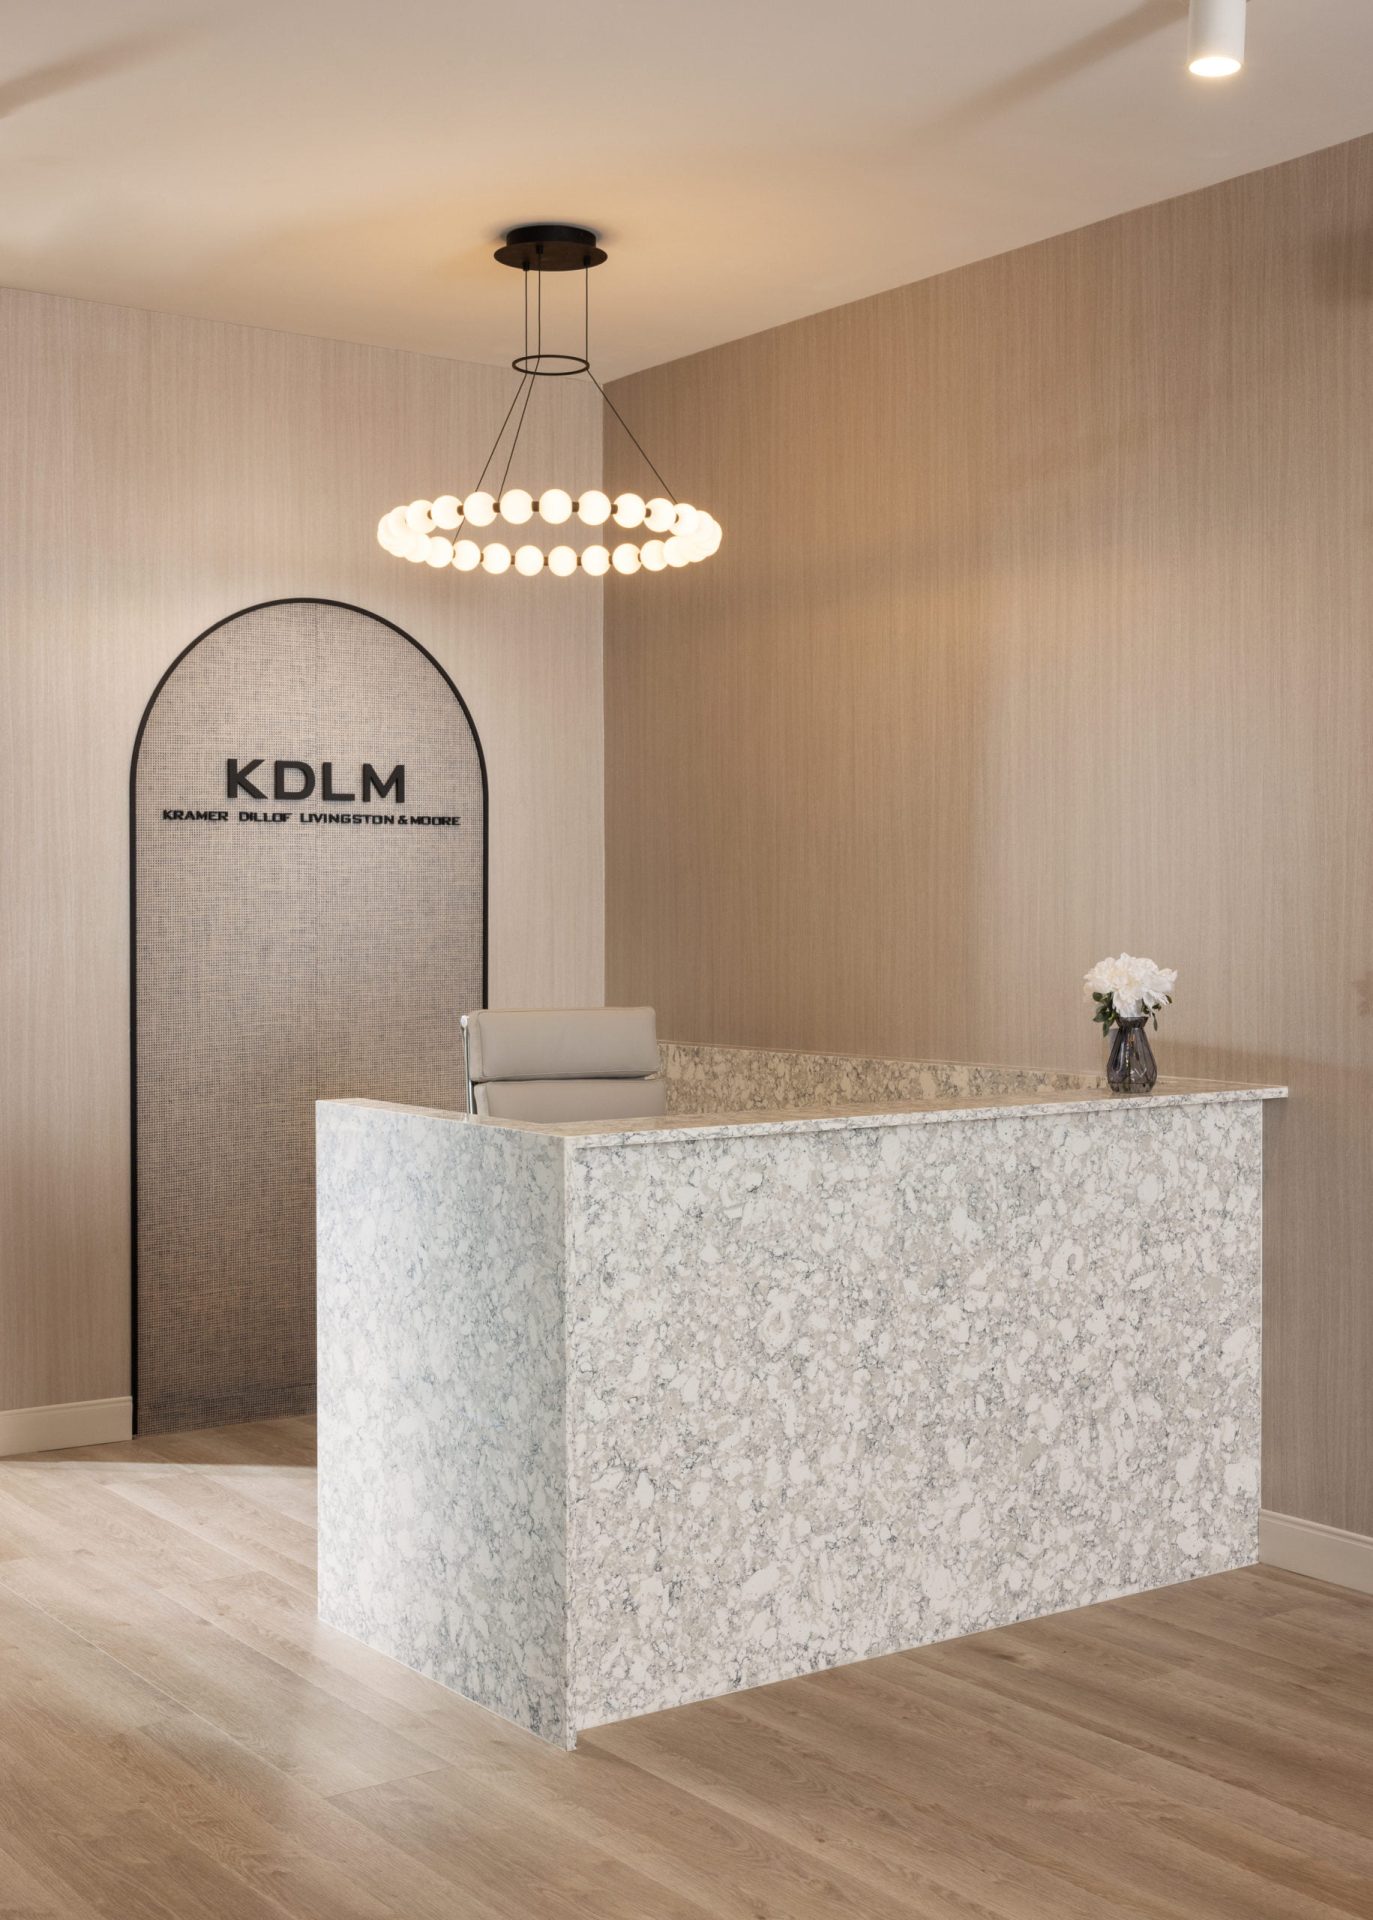 Kramer Dillof Livingston & Moore, NYC Newly designed entryway to impress clients